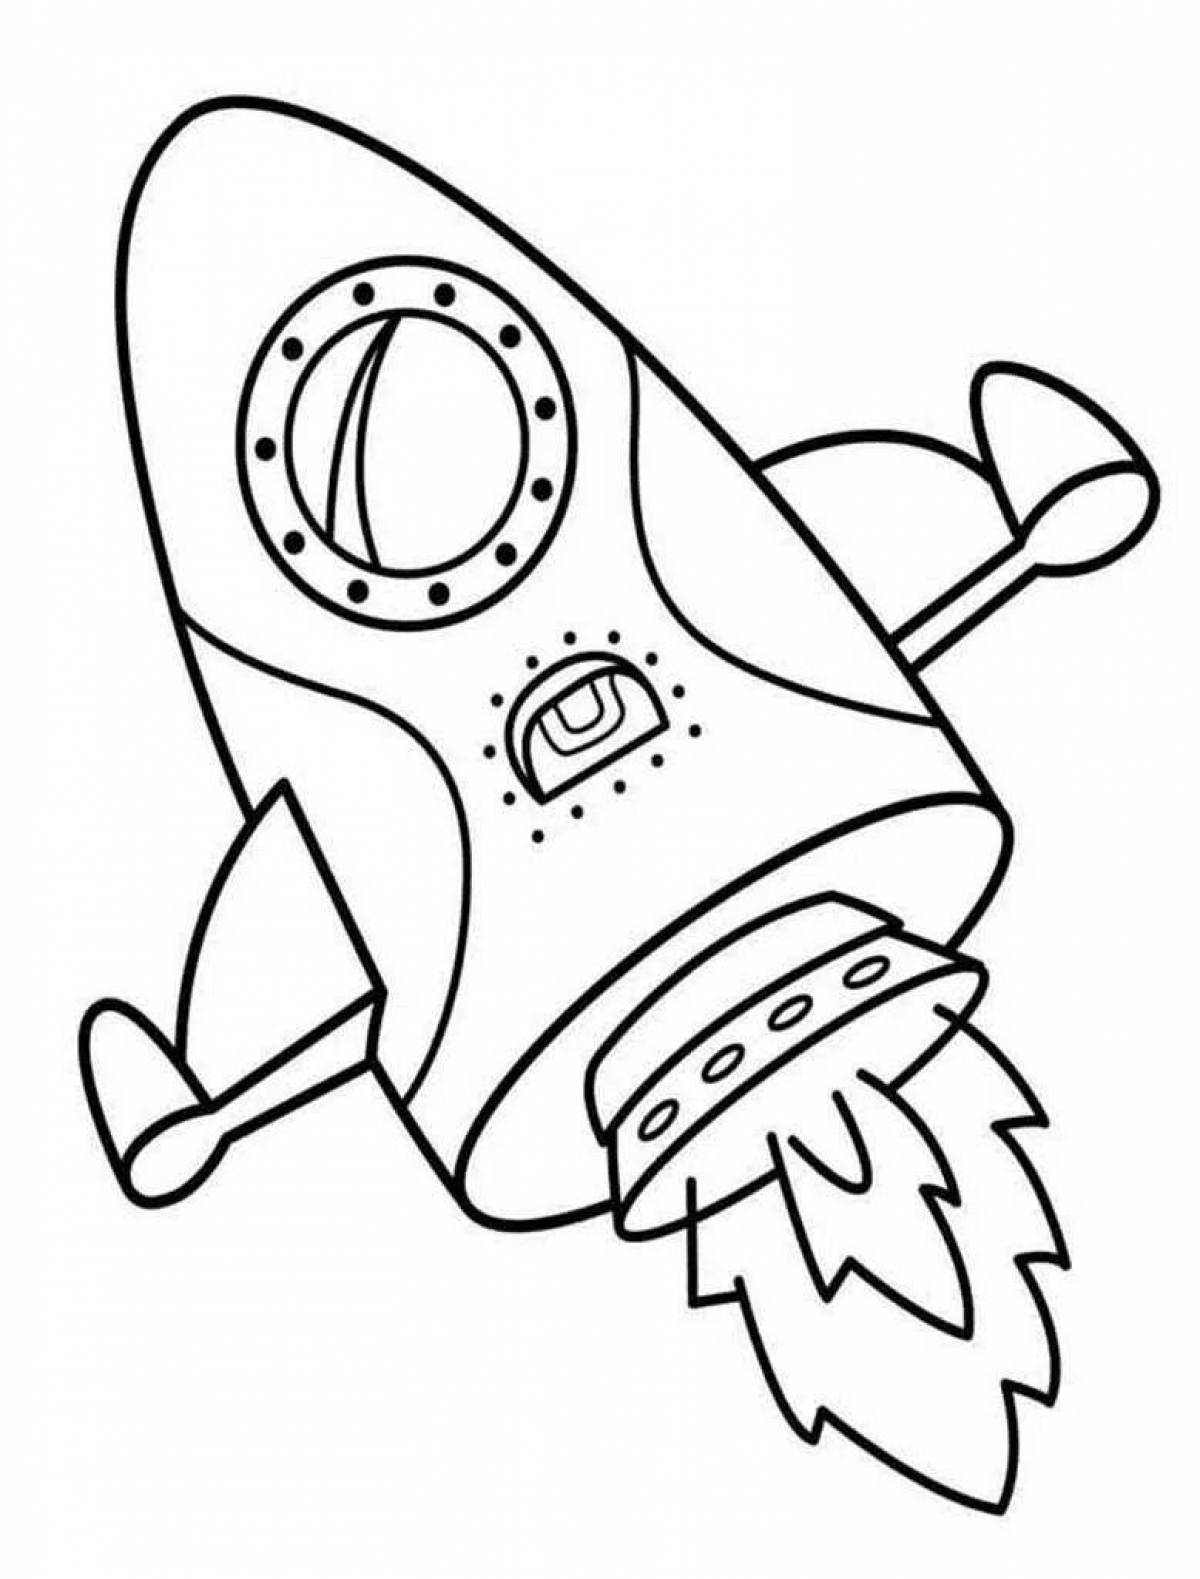 Shiny space rocket coloring page